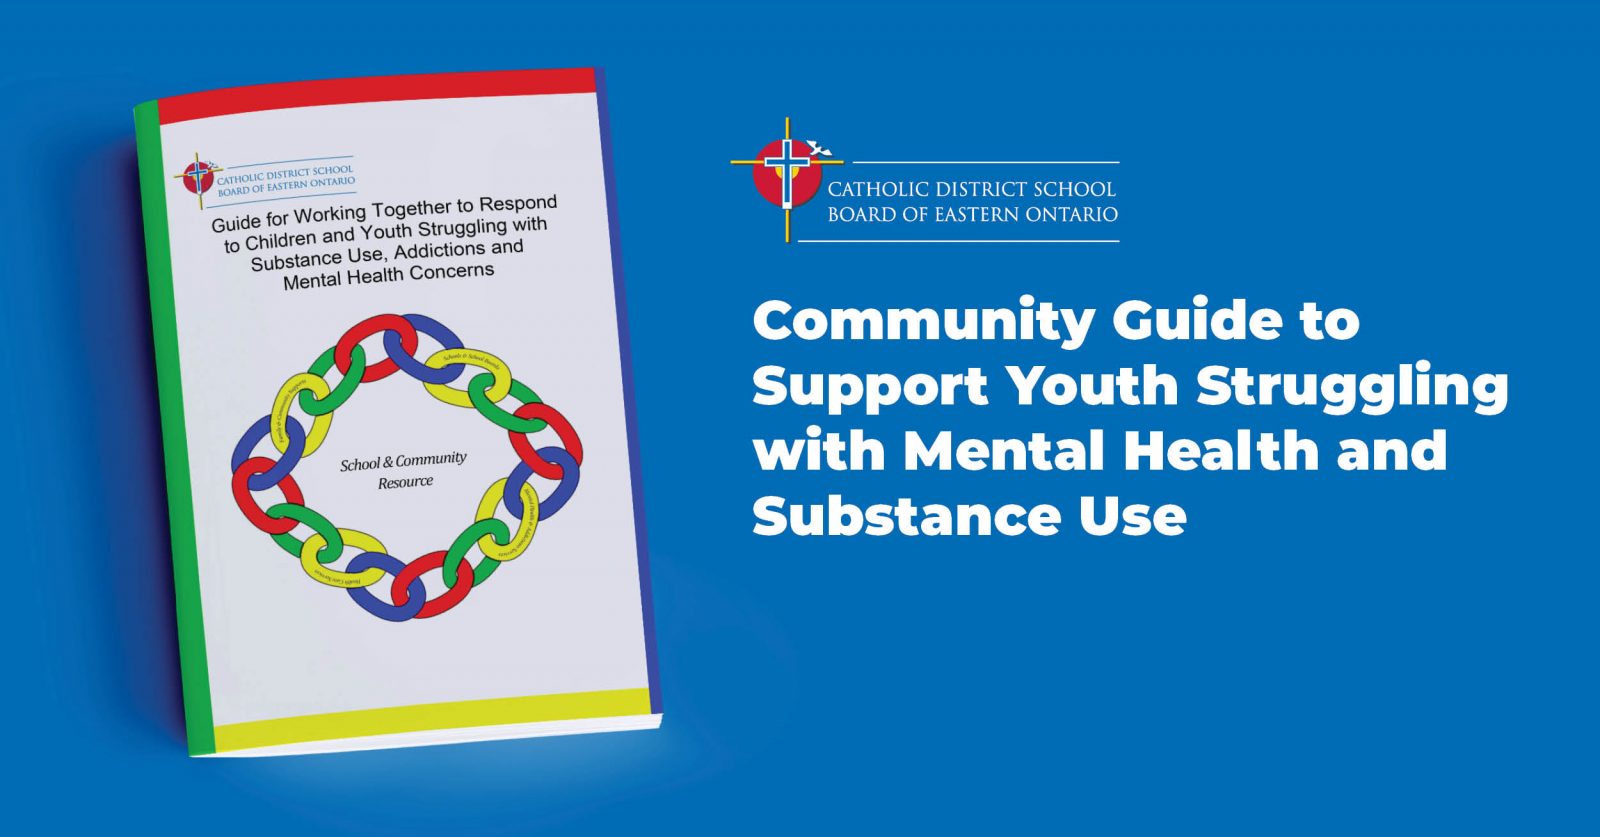 CDSBEO launches new guide to help students struggling with mental health and substance use